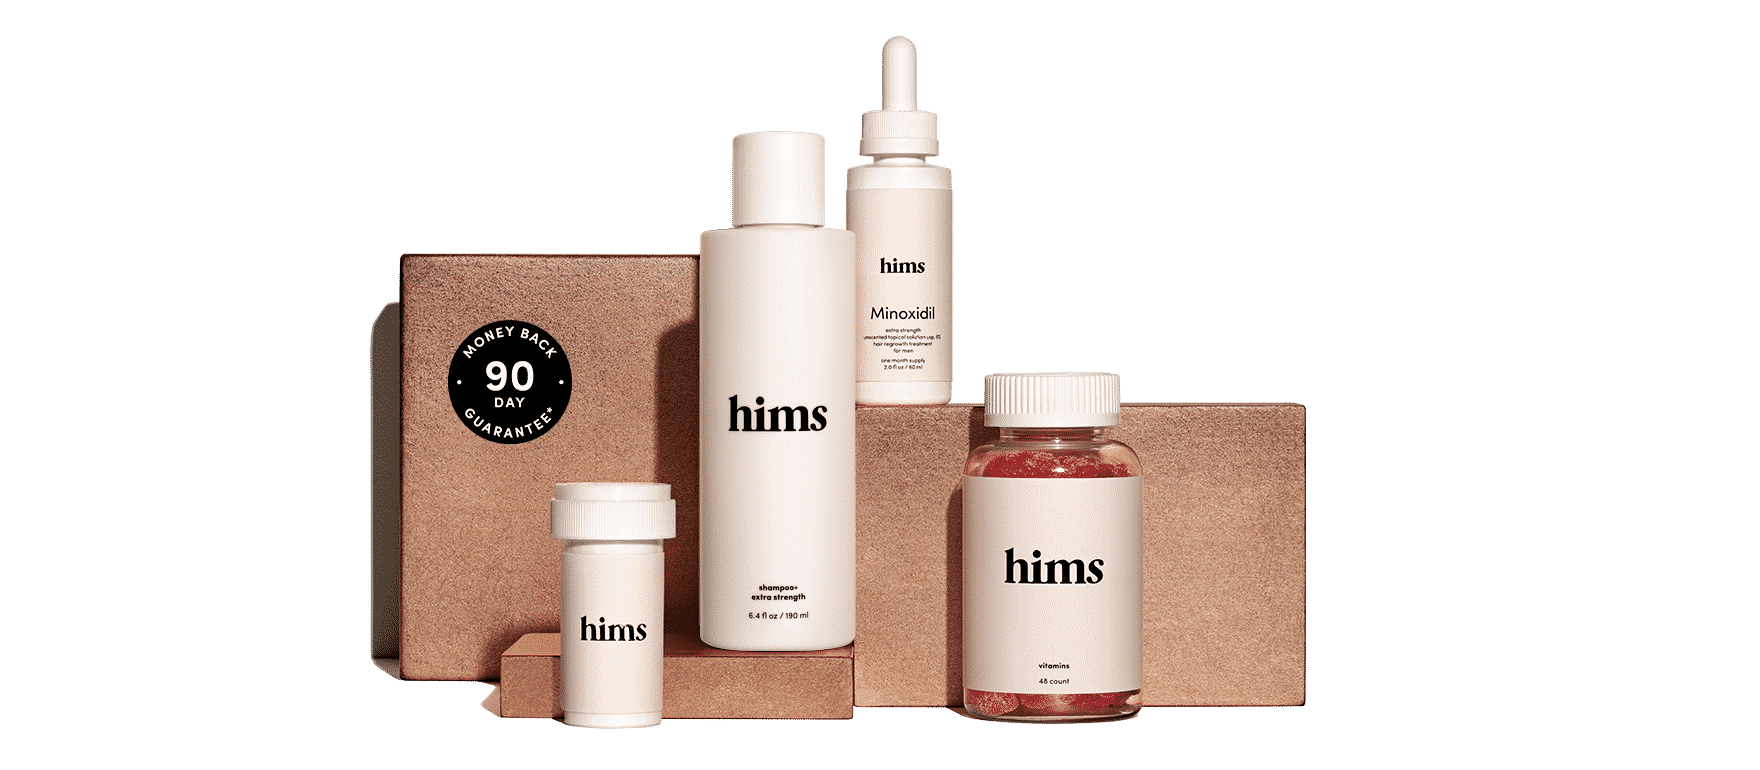 hims products